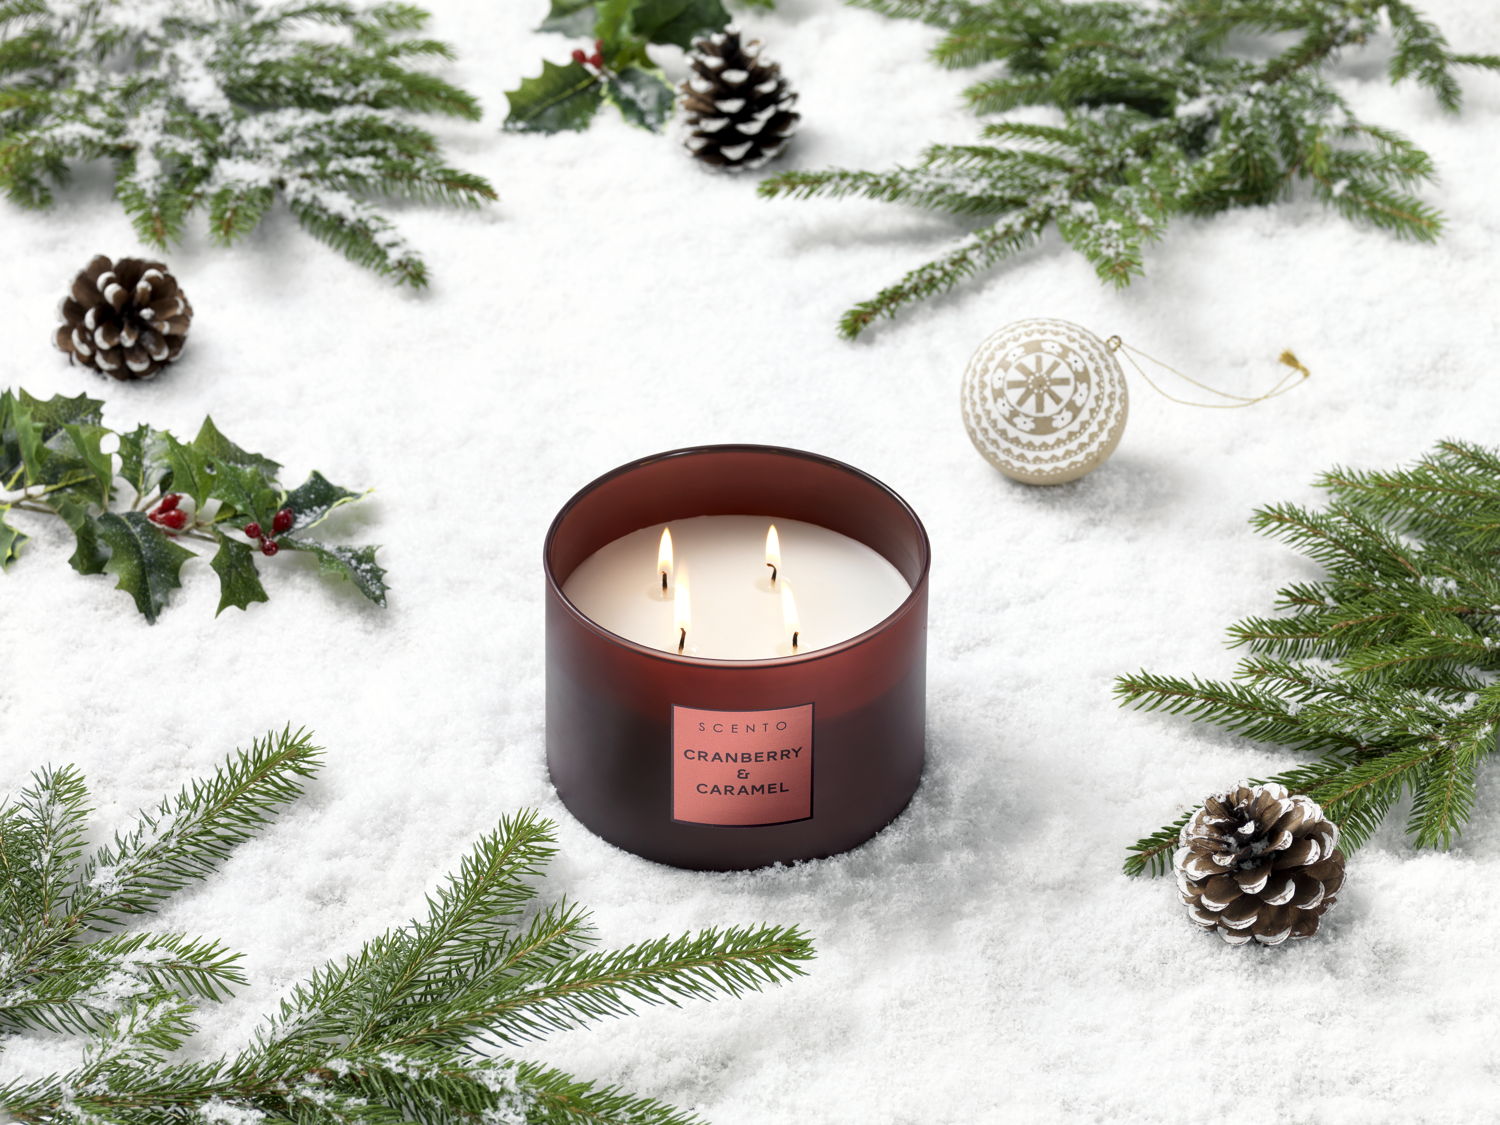 Cranberry&Caramel_Candle_Lifestyle2_BE€34,95_LUX€36,99